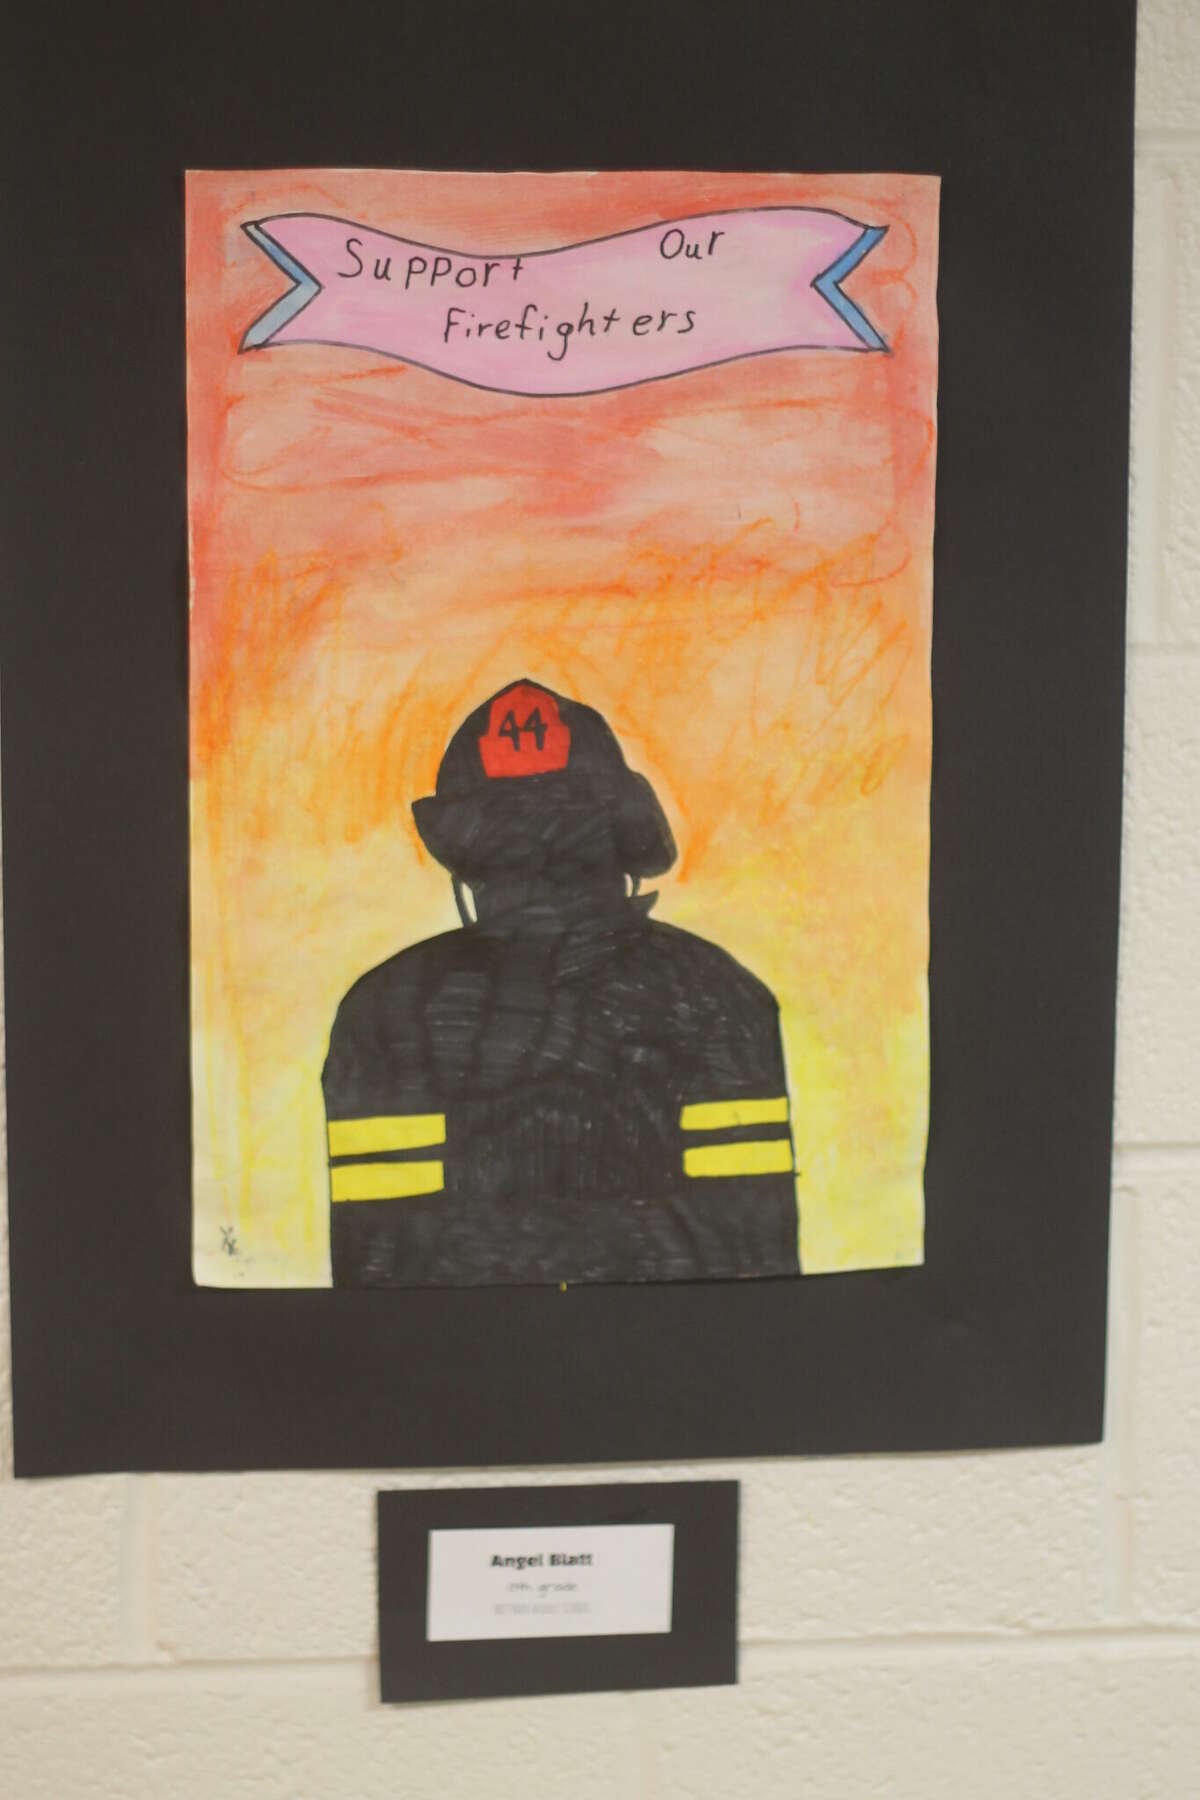 The Manistee County Courthouse is hosting a student art exhibit honoring first responders through July 1.